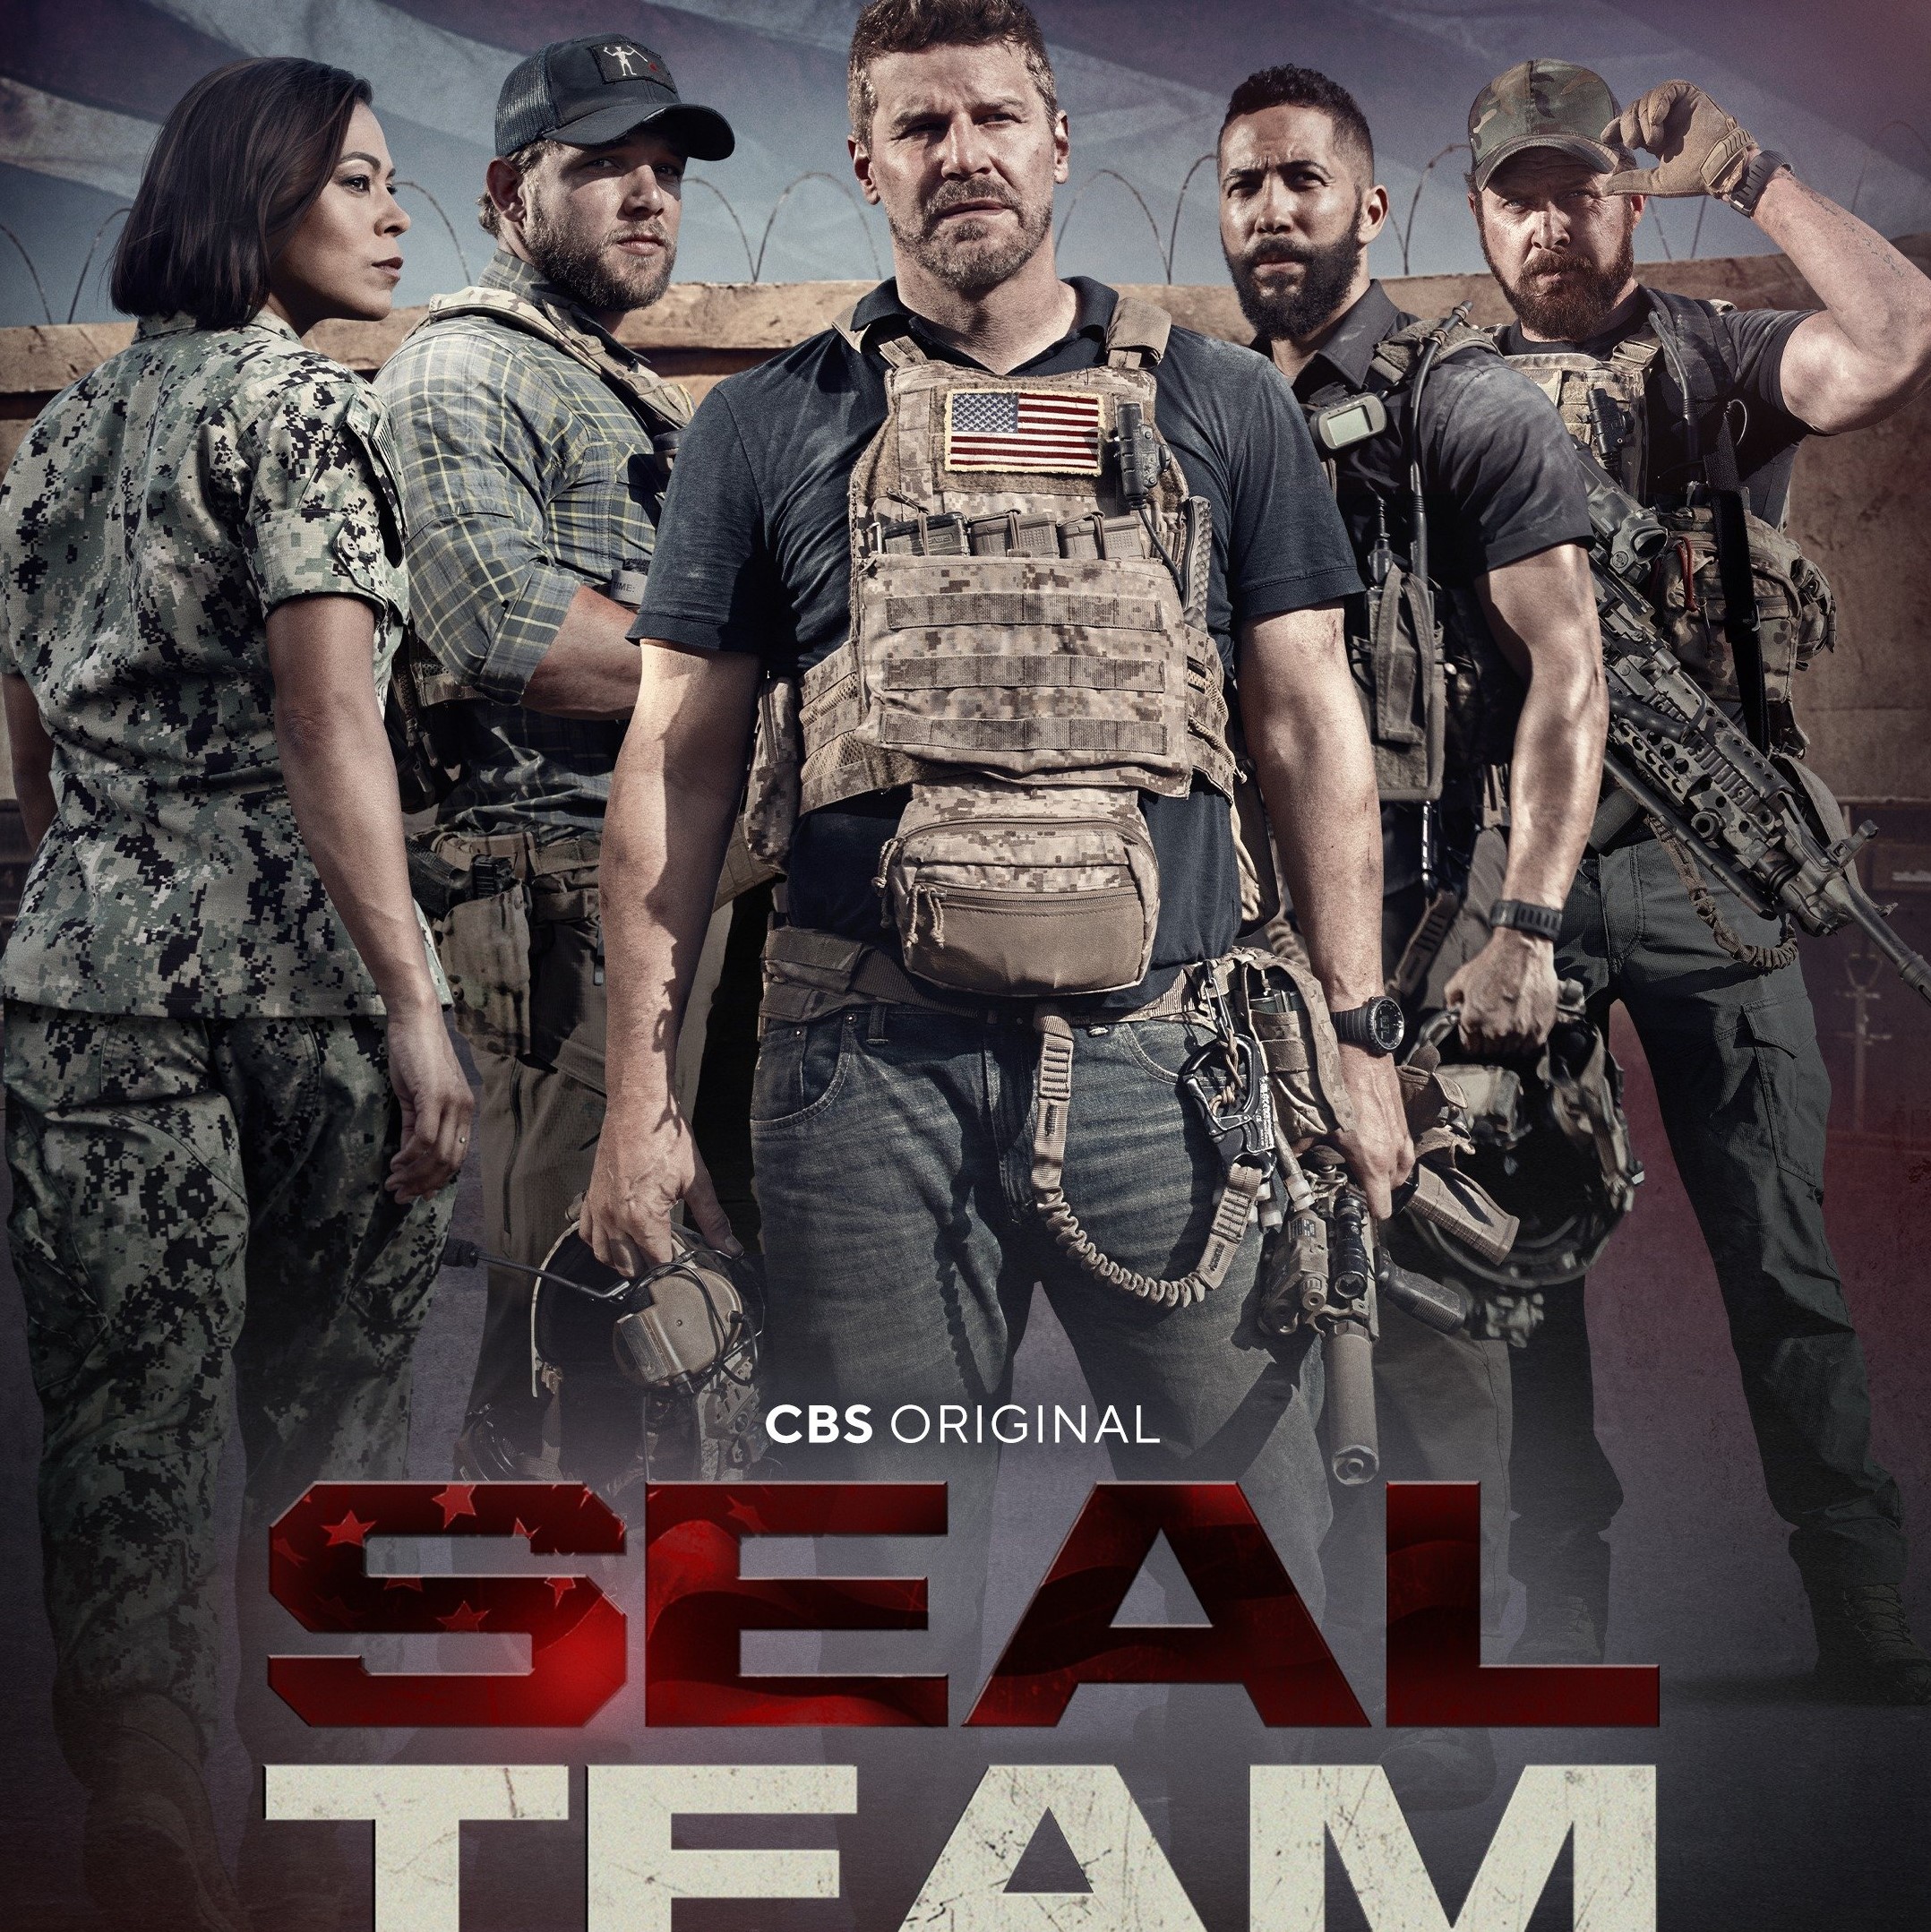 Seal Team television show on CBS